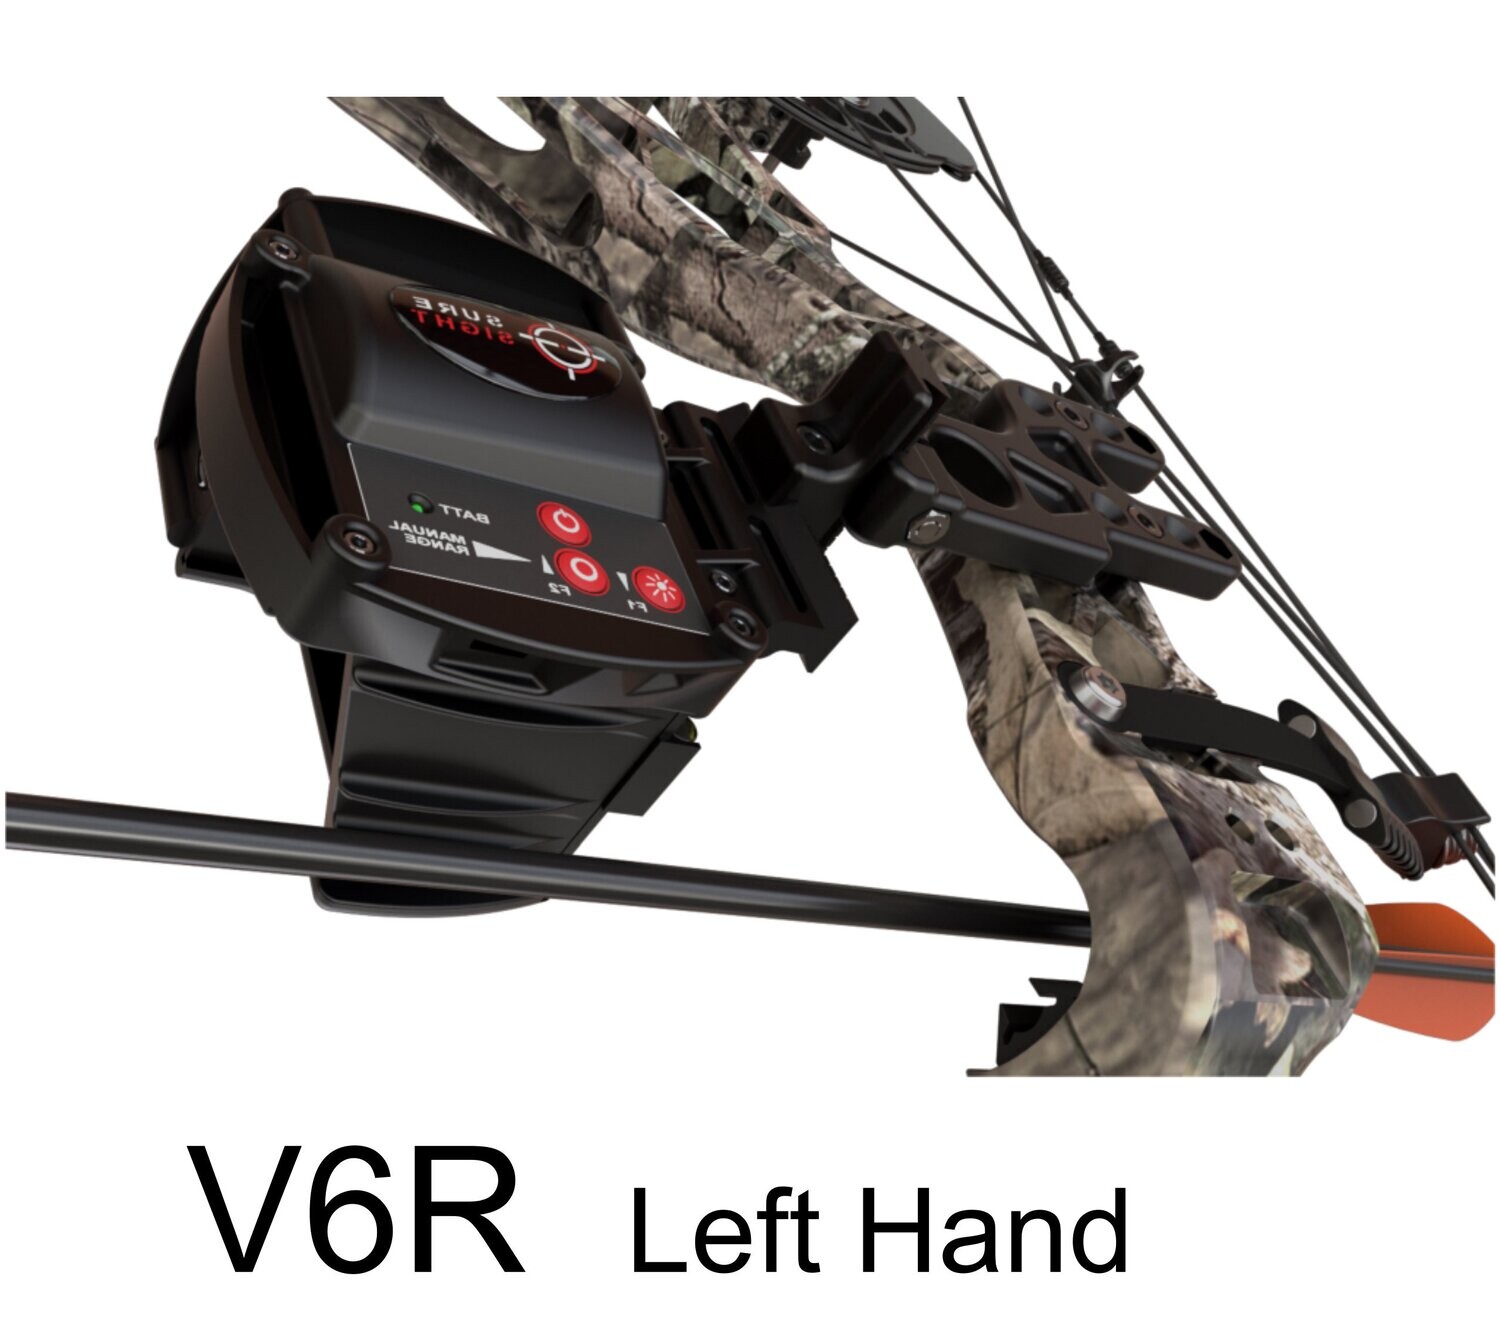 Sure Sight V6R (Left Hand)
Range Finding Automatic Sight